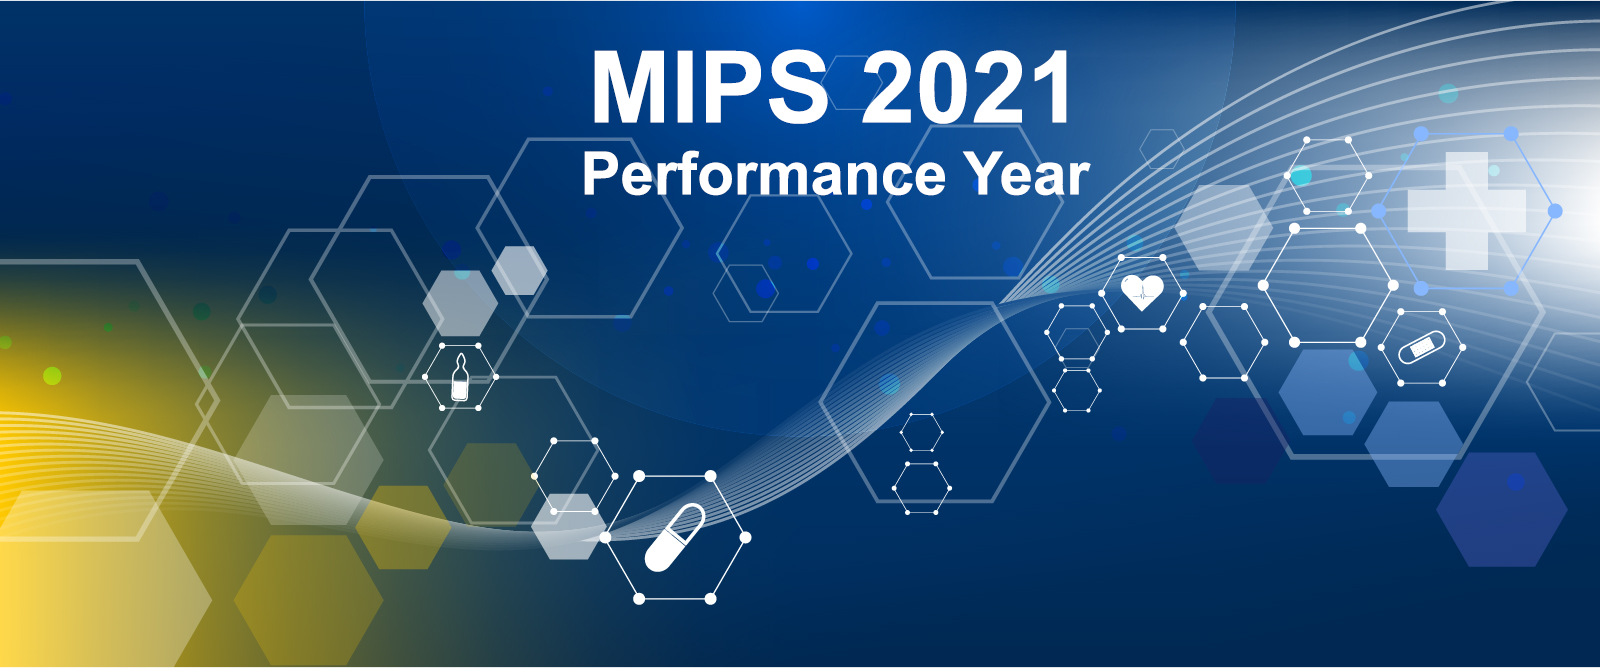 MIPS 2021